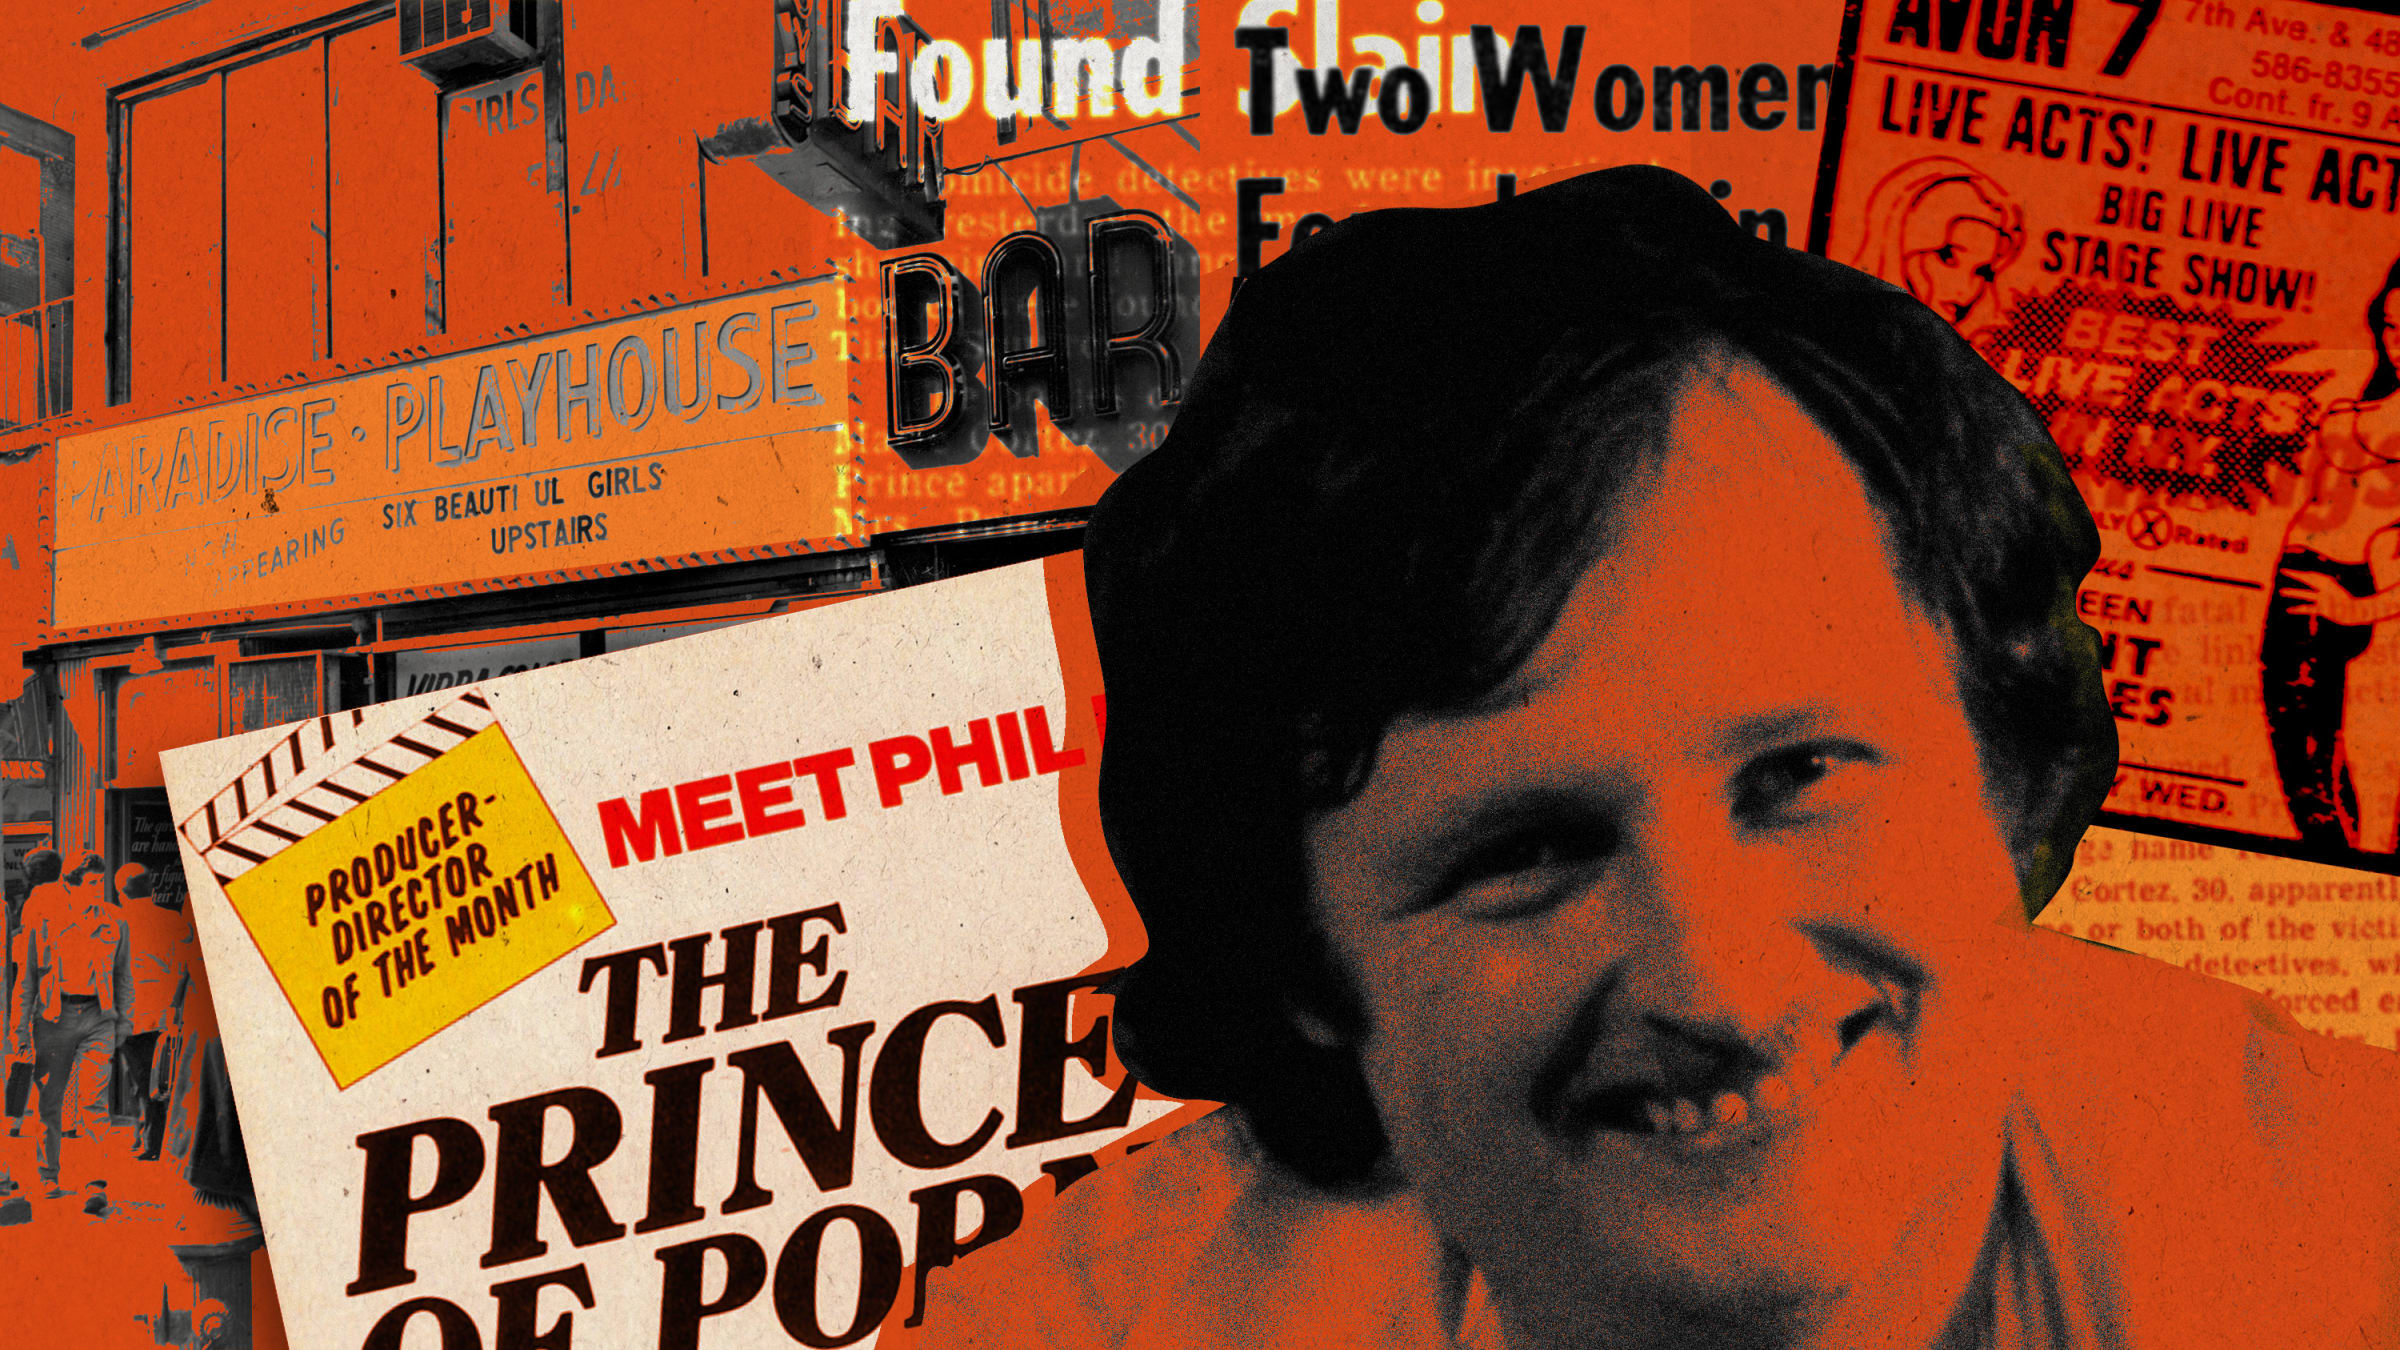 Xxx Teen Pron - The Porn Prince of New York's Live Sex Shows in 1970s Times Square